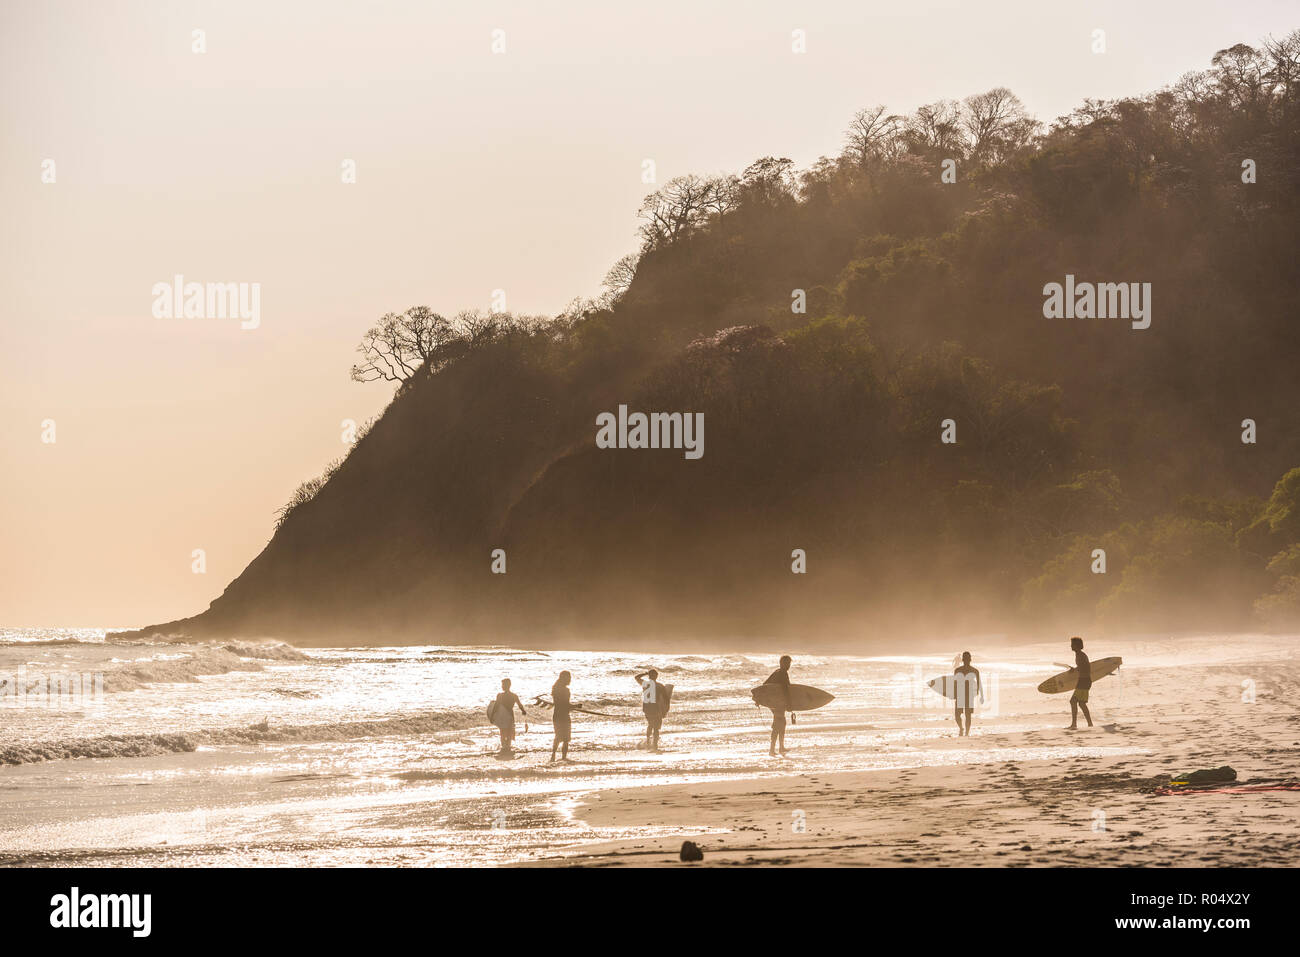 Surfers surfing on a beach at sunset, Nosara, Guanacaste Province, Pacific Coast, Costa Rica, Central America Stock Photo